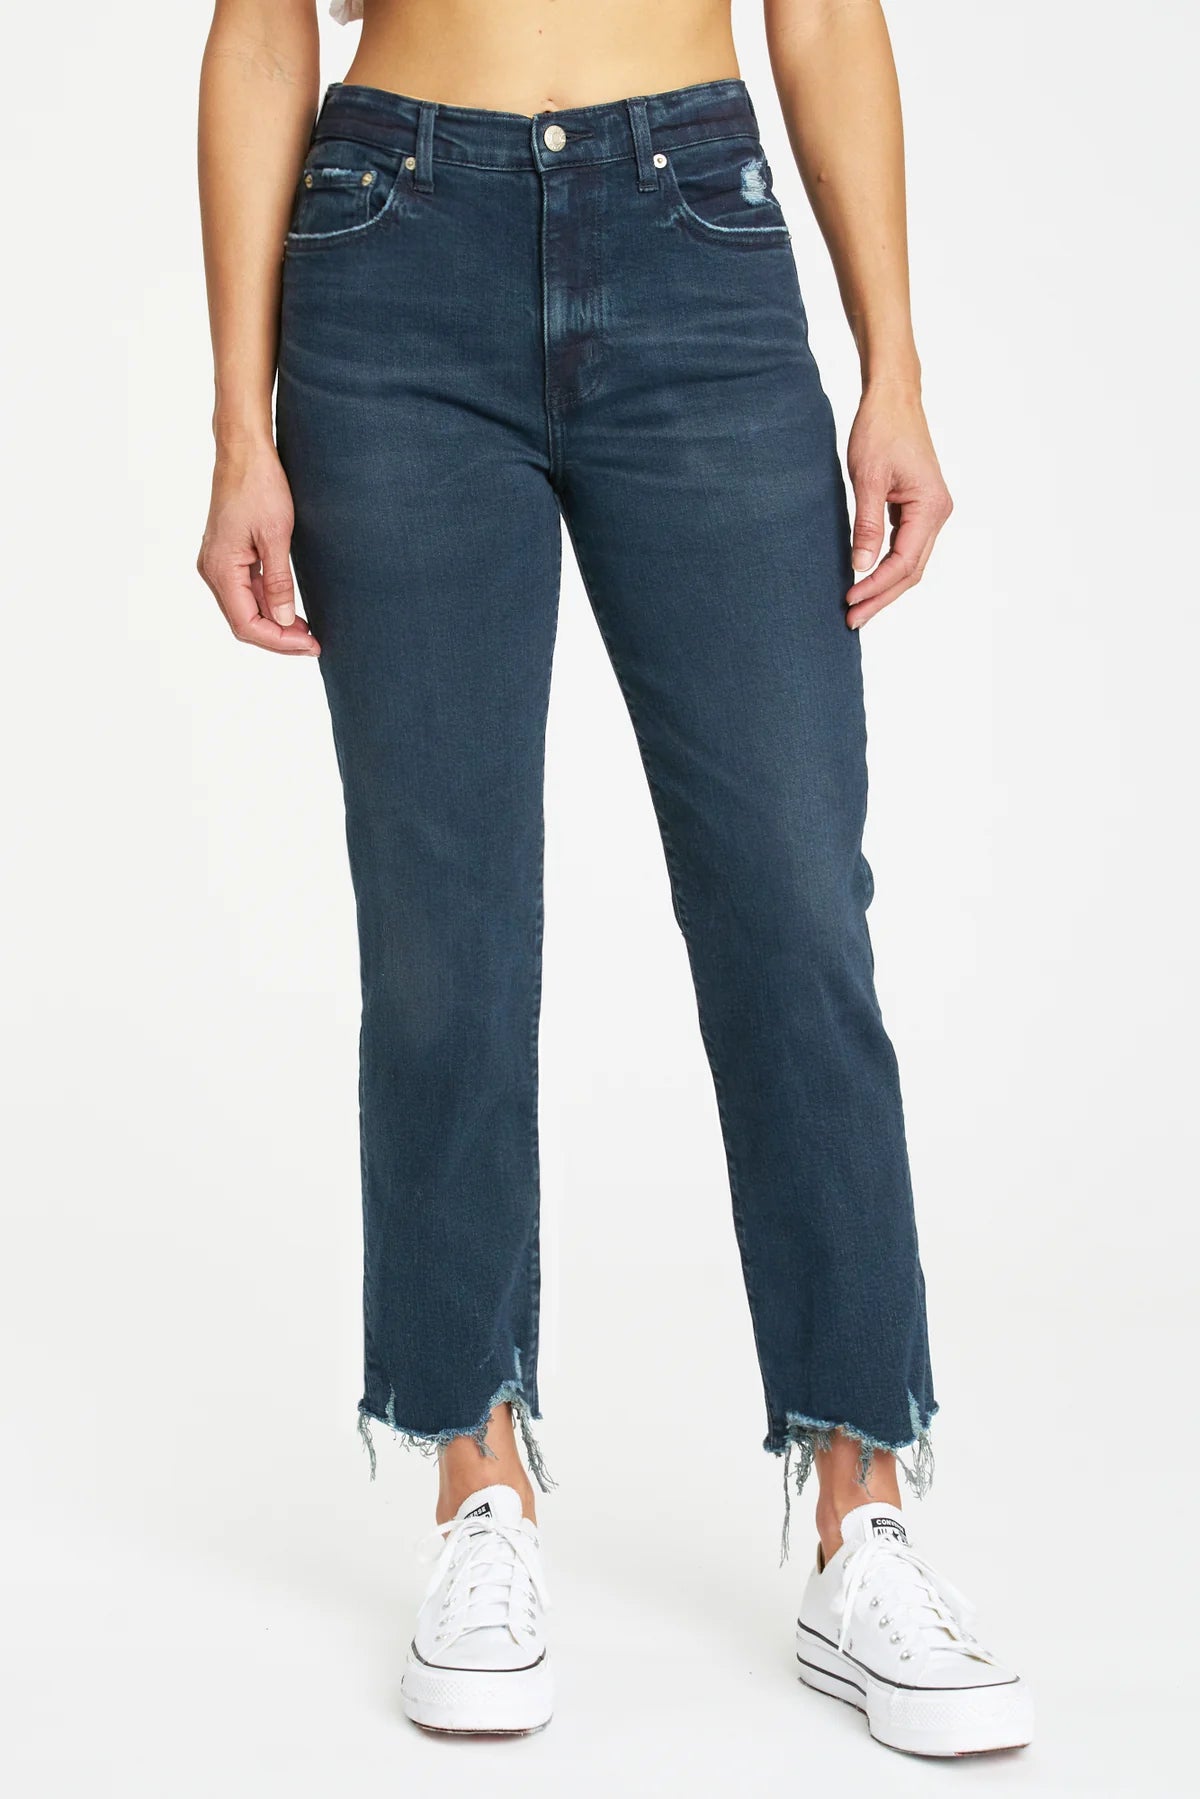 Sraight Up Manifest Jeans